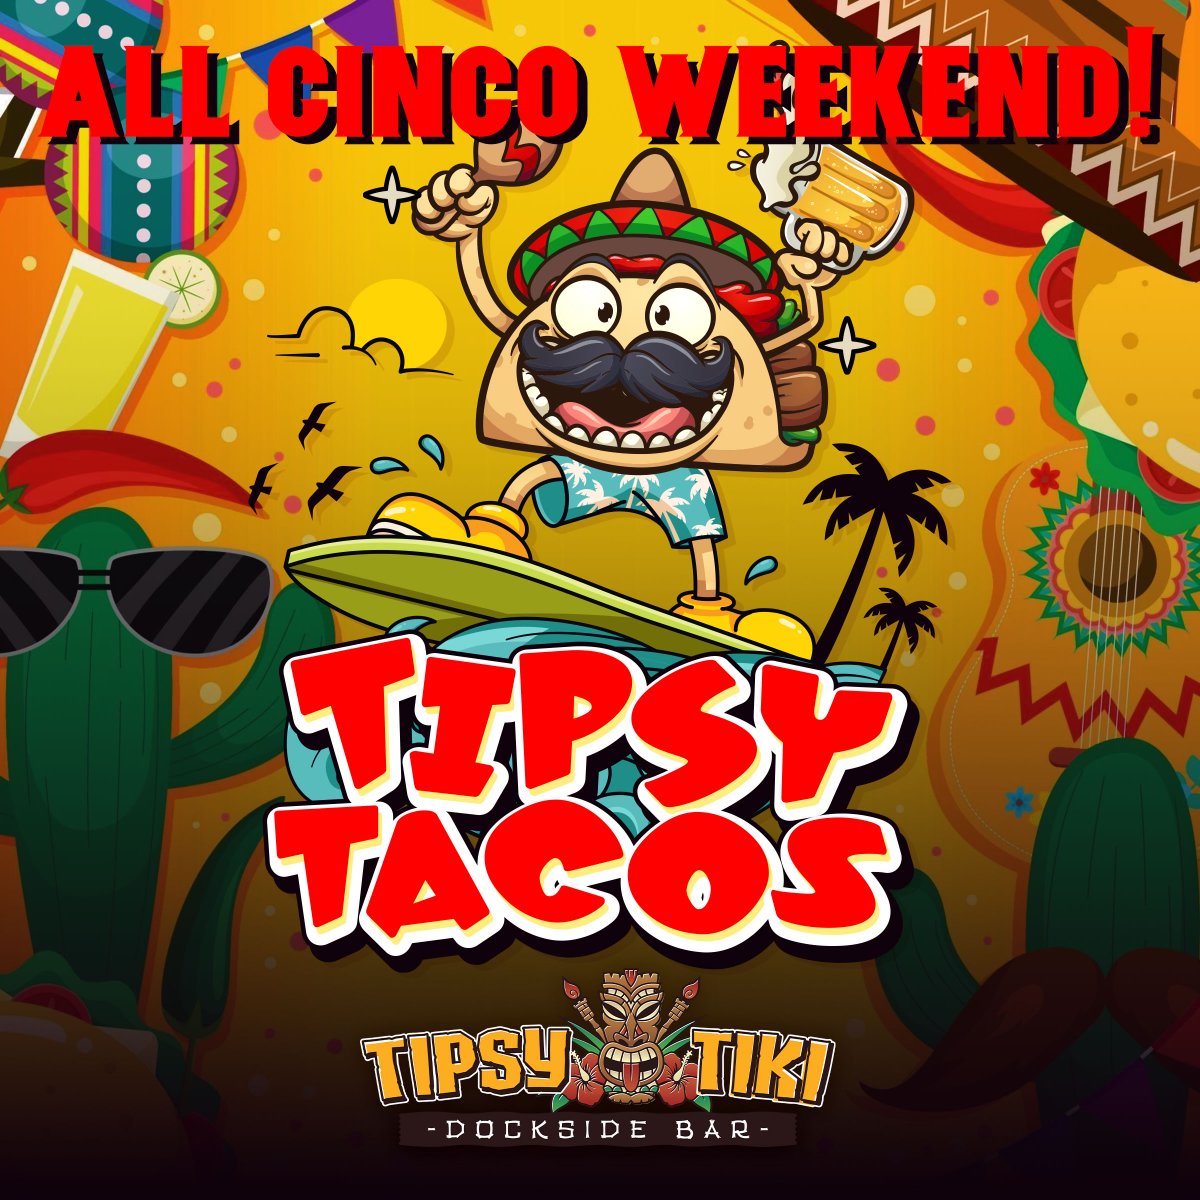 SUNDAY FUNDAY! CINCO! Style. TODAY! at Tipsy Tiki on The Canal. Tacos, Tequila, Cerveca, and Margarita Specials all day long. Plus LIVE! DJ playing all your favorites.